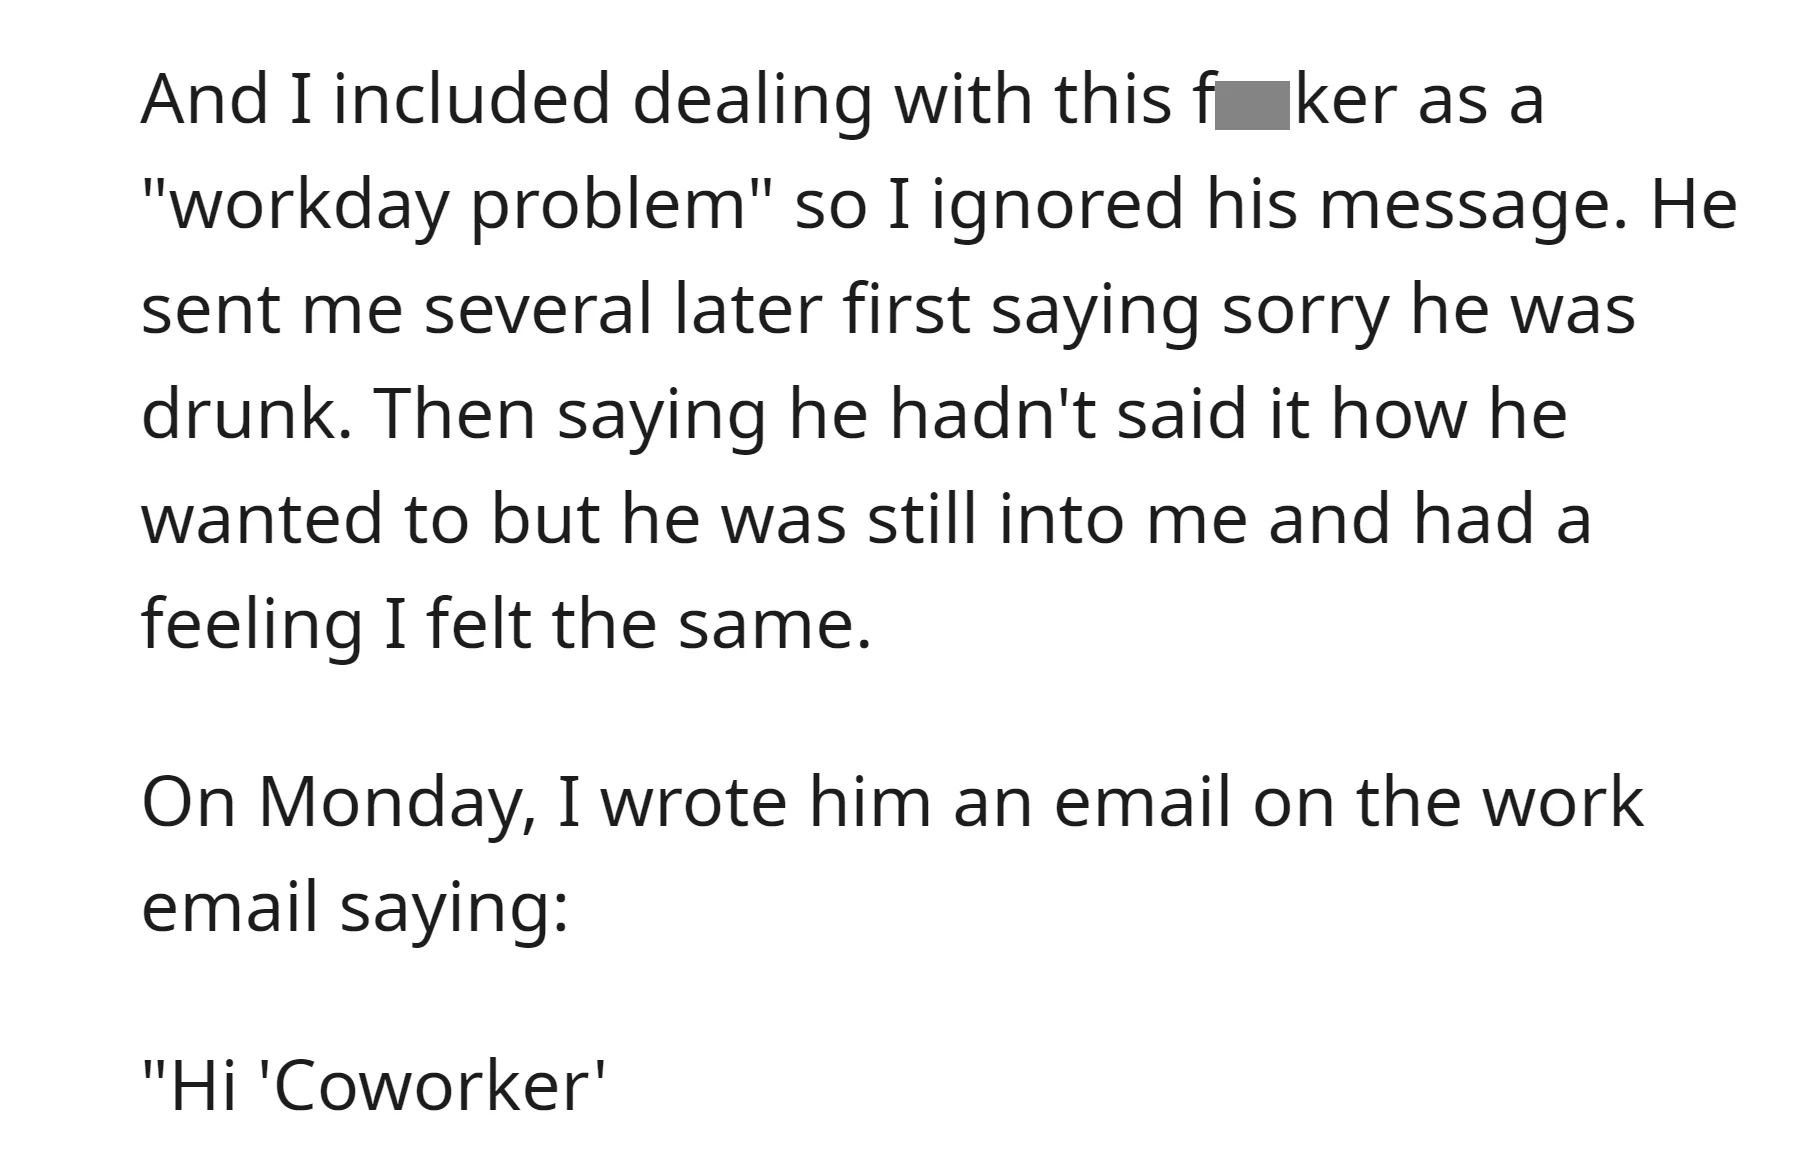 OP ignored them initially and later sent an email on Monday